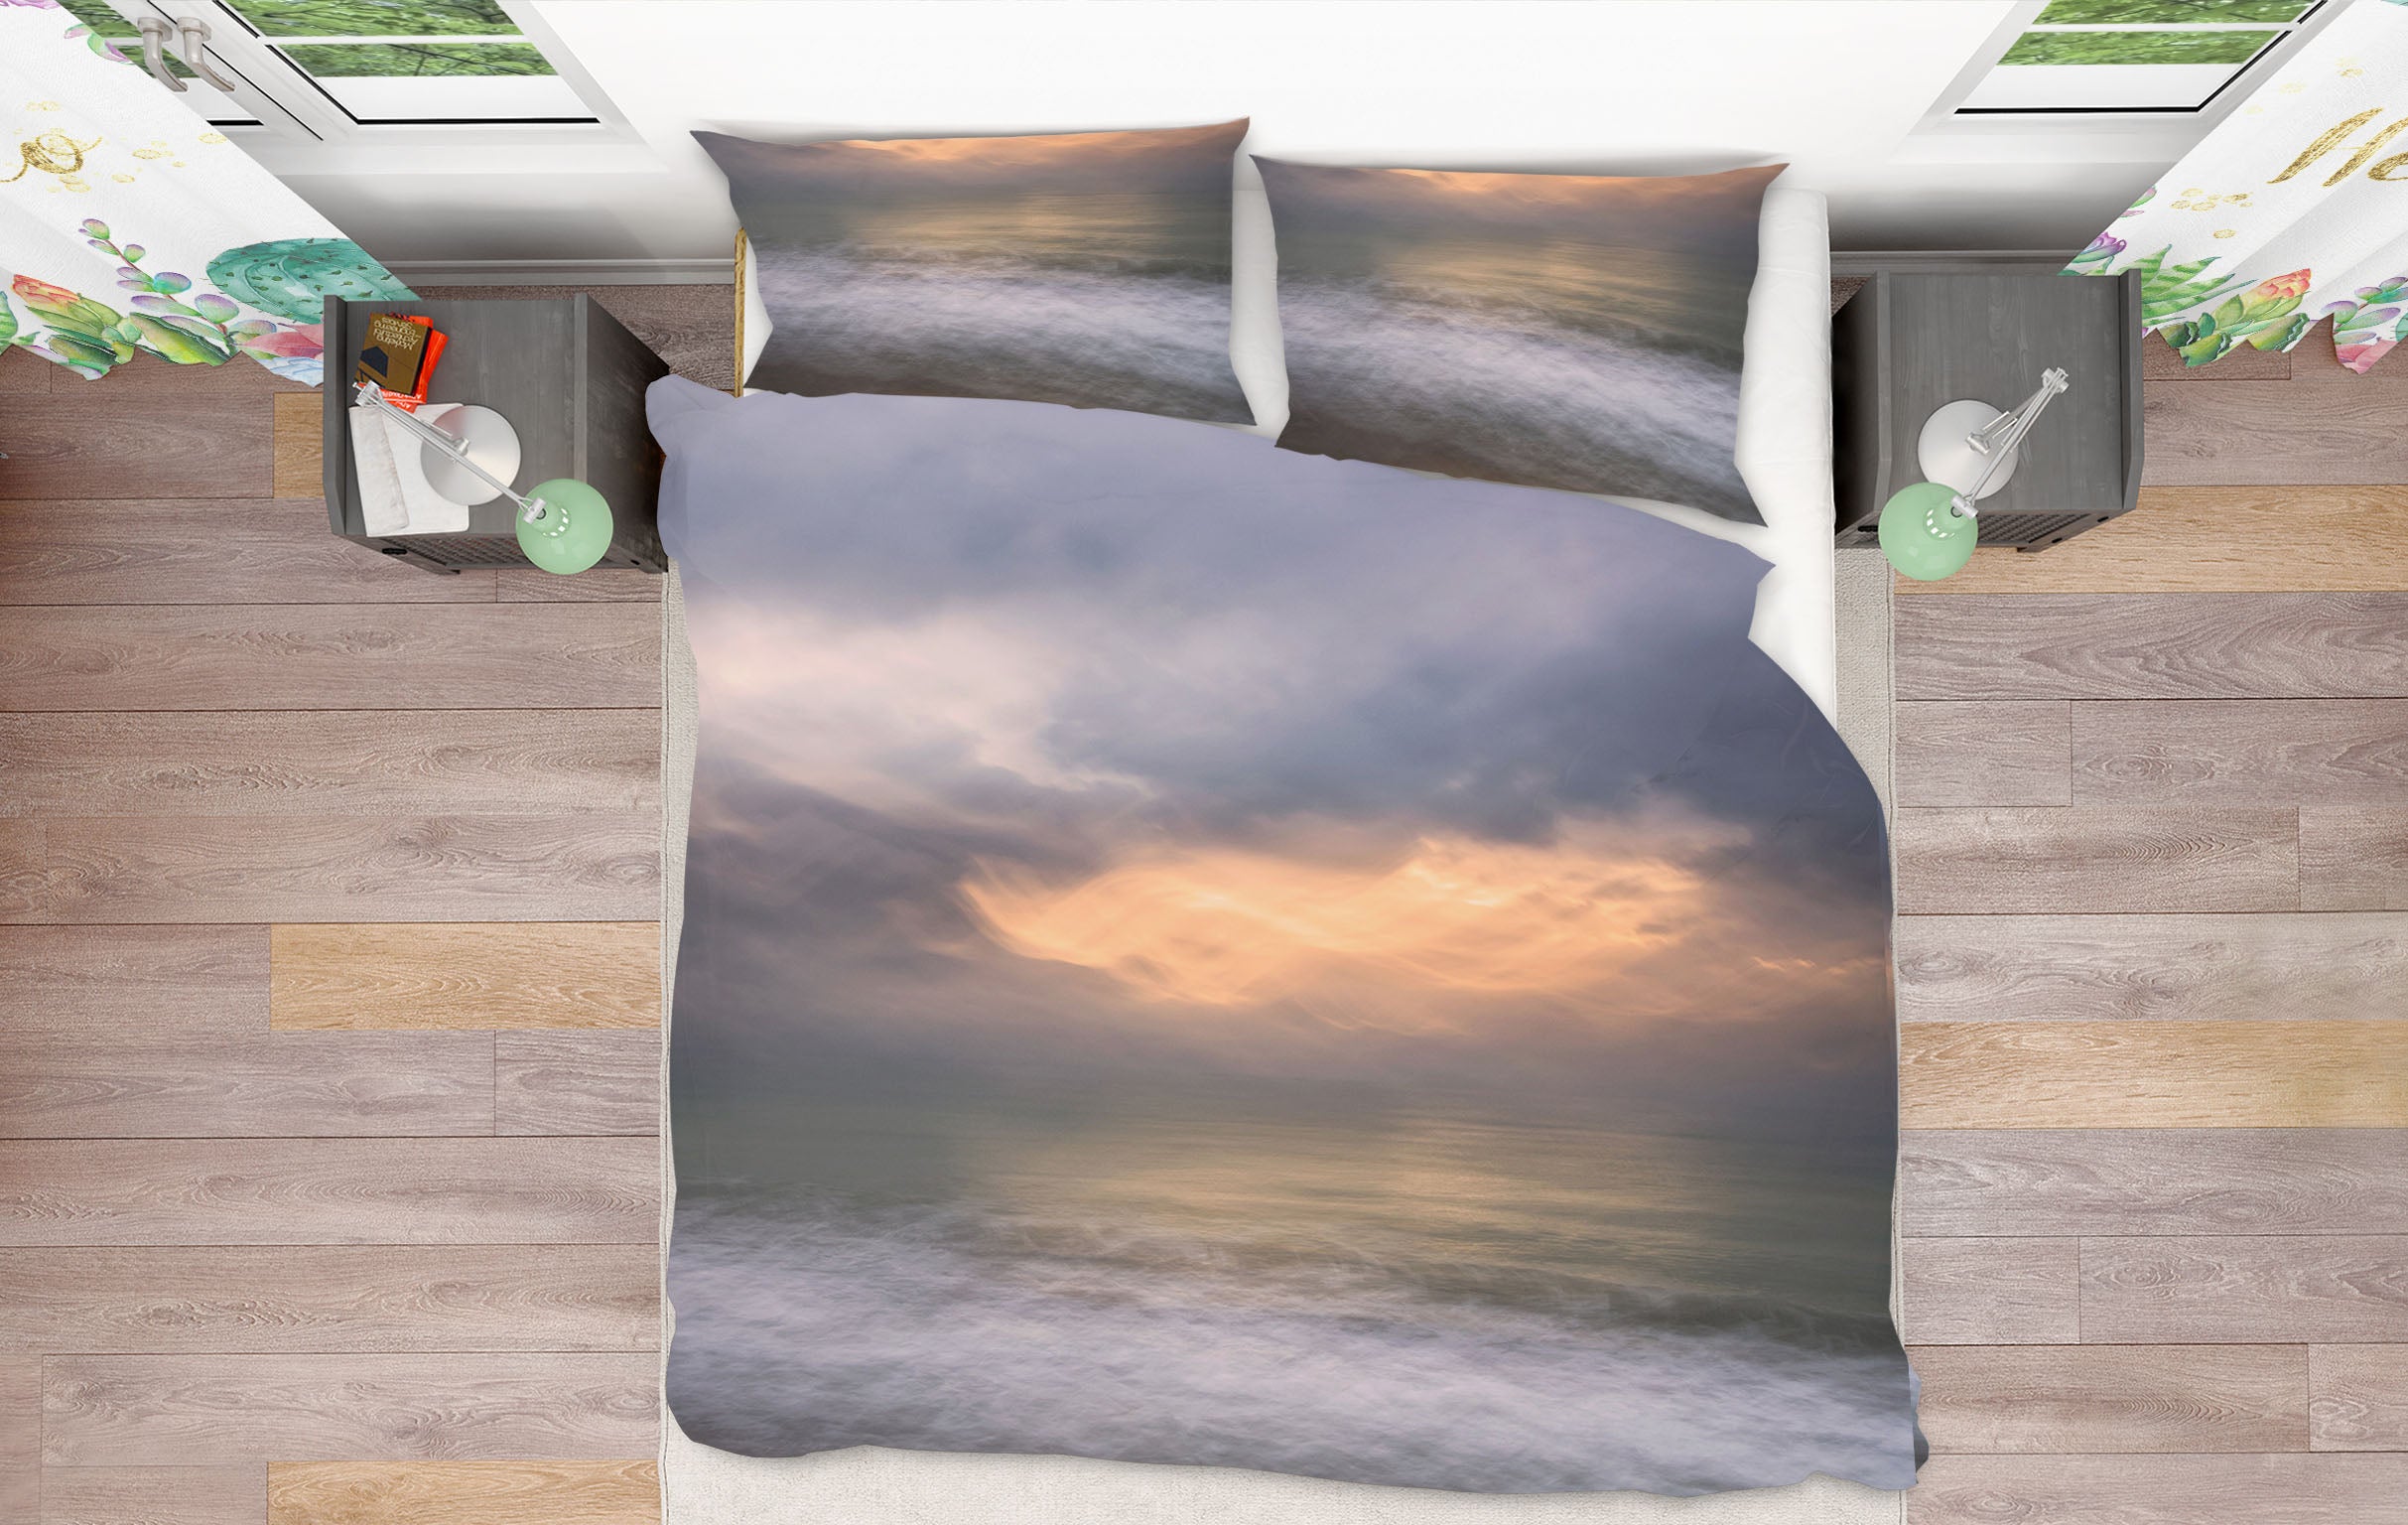 3D Heavy Rain Is Coming 2154 Marco Carmassi Bedding Bed Pillowcases Quilt